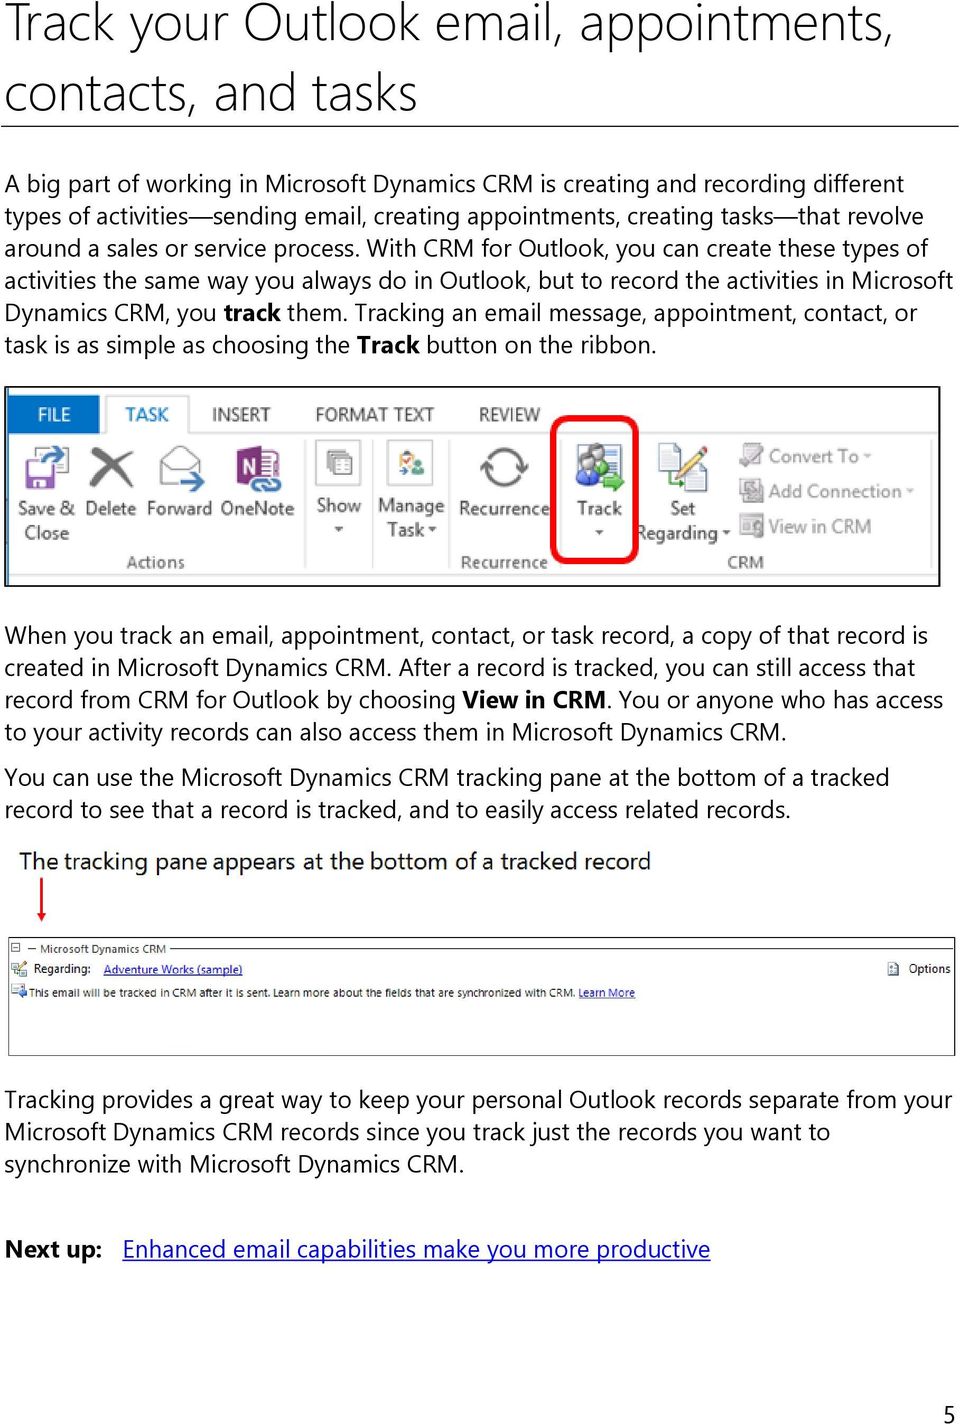 With CRM for Outlook, you can create these types of activities the same way you always do in Outlook, but to record the activities in Microsoft Dynamics CRM, you track them.